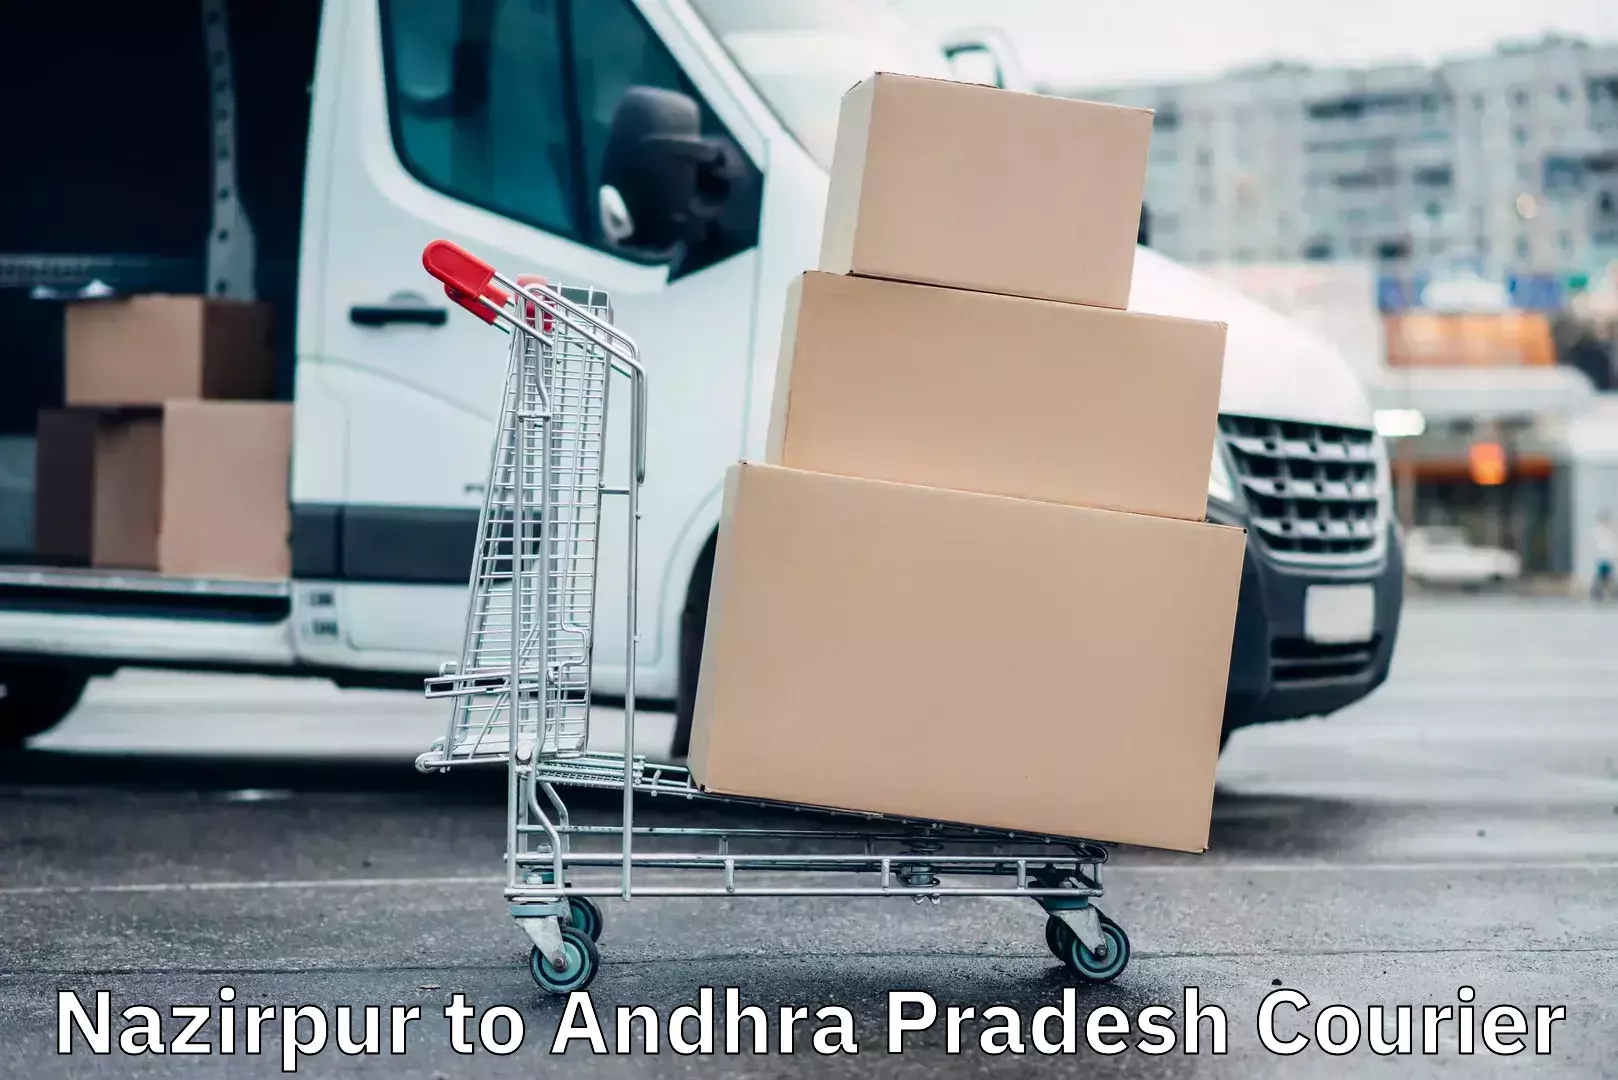 Express delivery capabilities Nazirpur to Andhra Pradesh